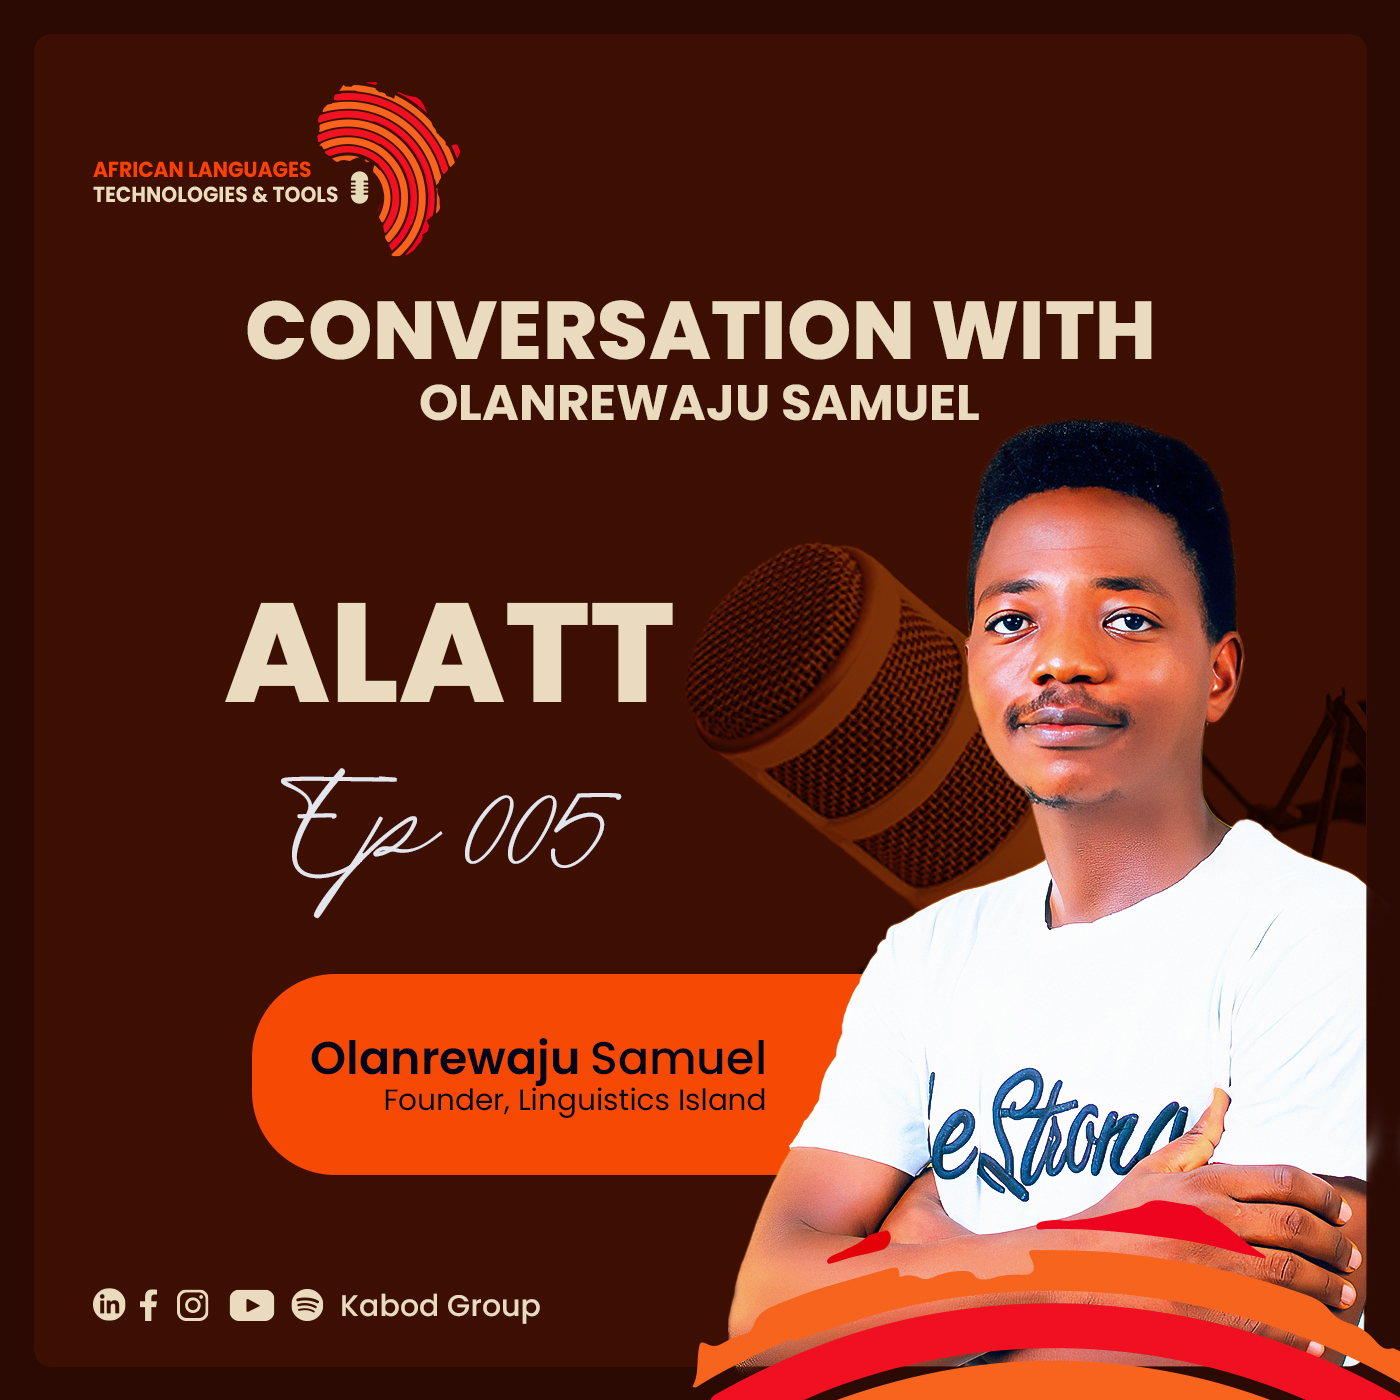 Preserving African Languages through Technology: A Conversation with Olanrewaju Samuel, Founder of Linguistics Island, a Community for Linguists.